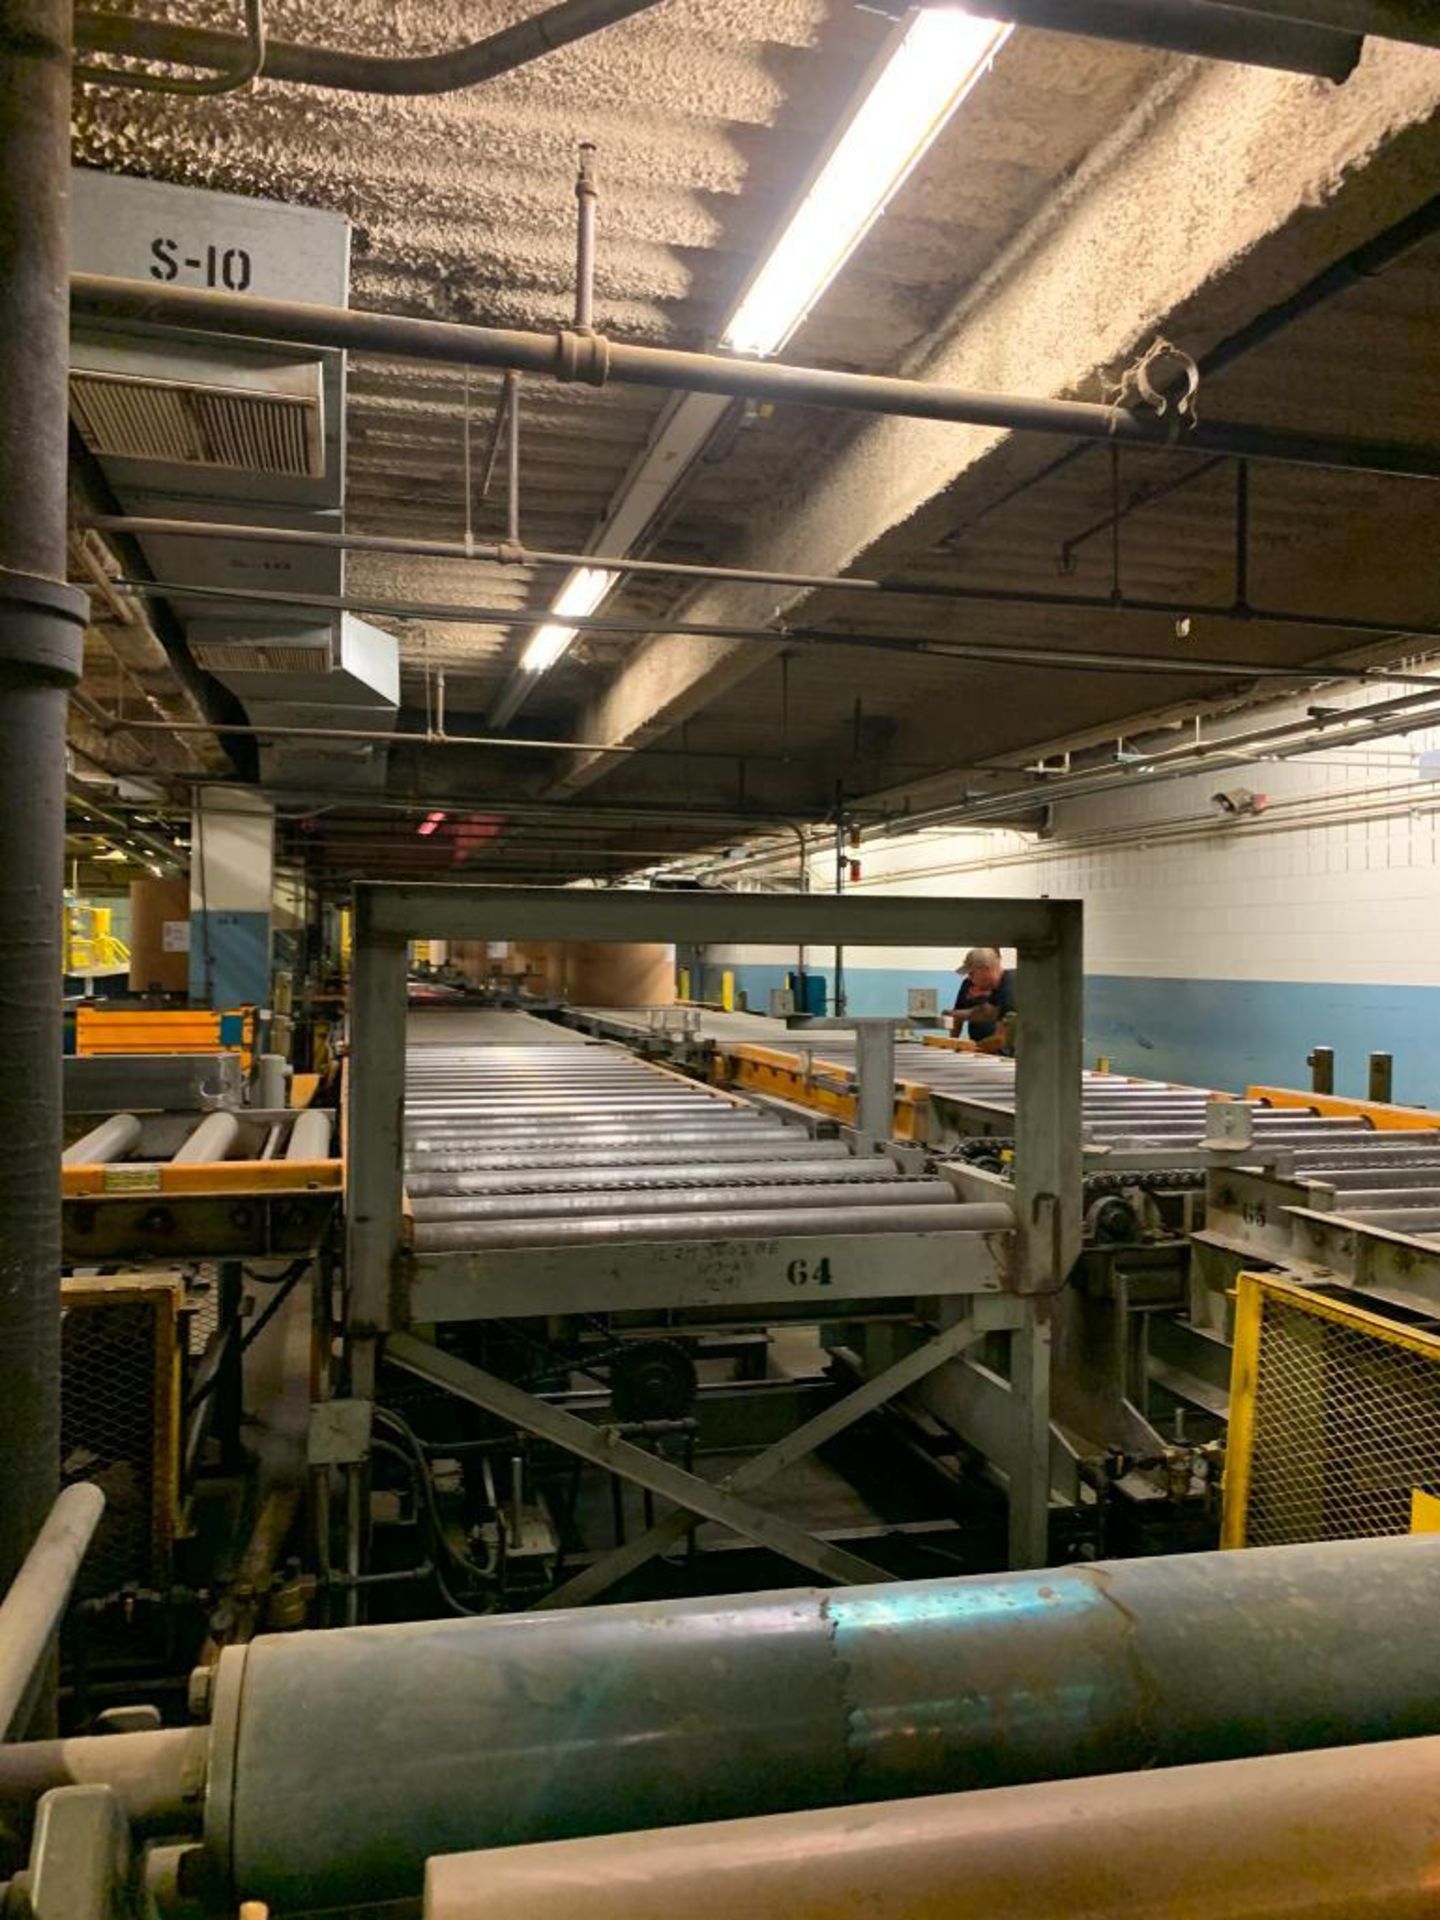 350' of Steel Power Roller/Plate 48" Conveyor, (6) 103" Hydraulic Lift Gate Sections, Photo Switches - Image 2 of 18